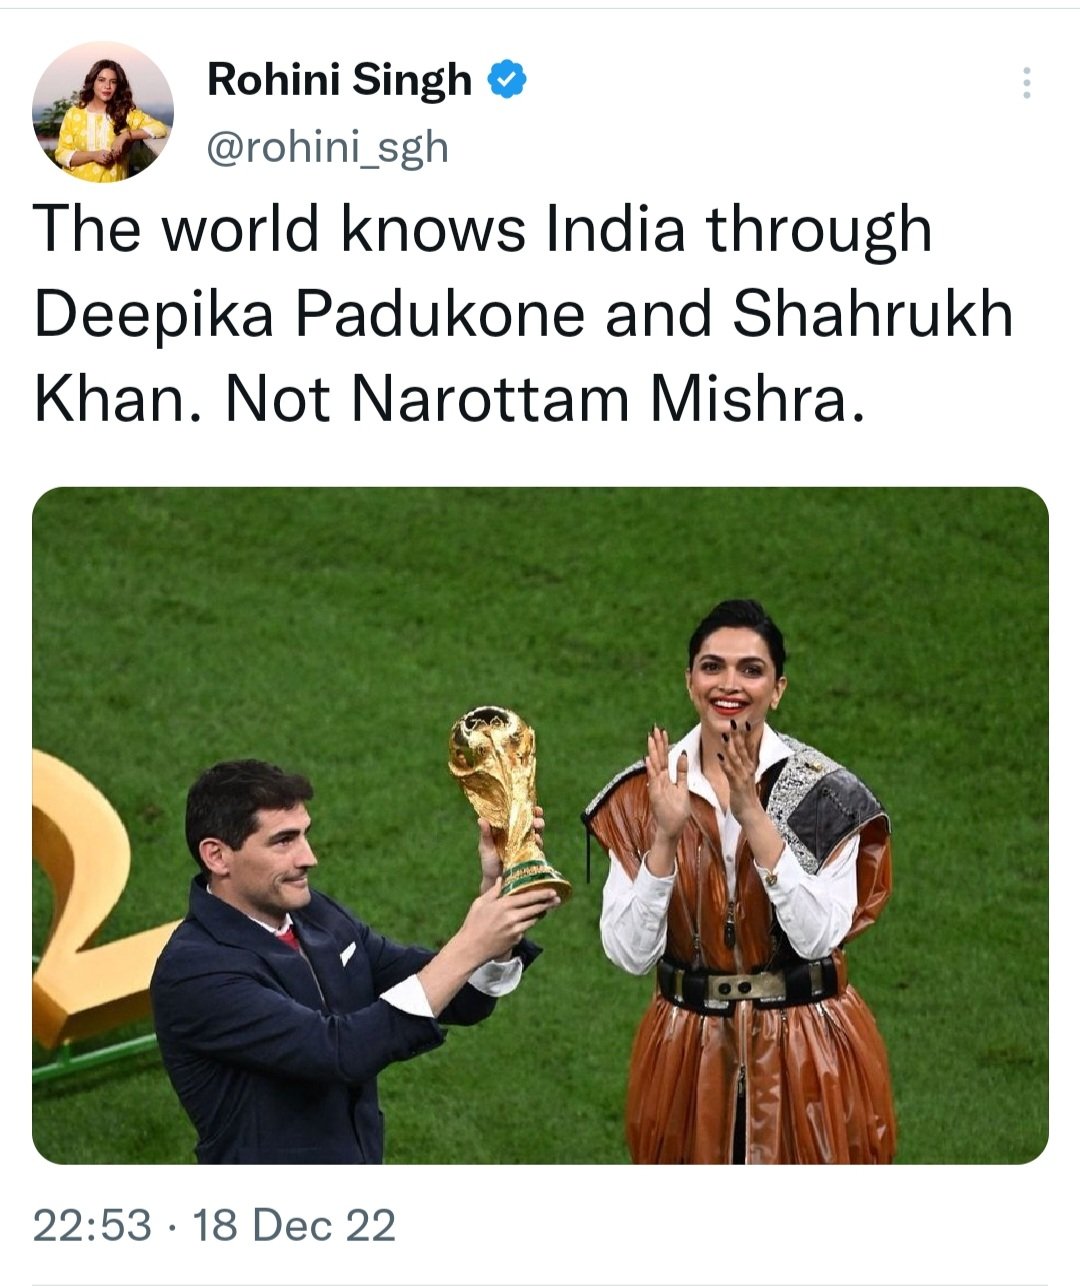 office of Mr Sinha on X: -Louis Vuitton sponsored the world cup